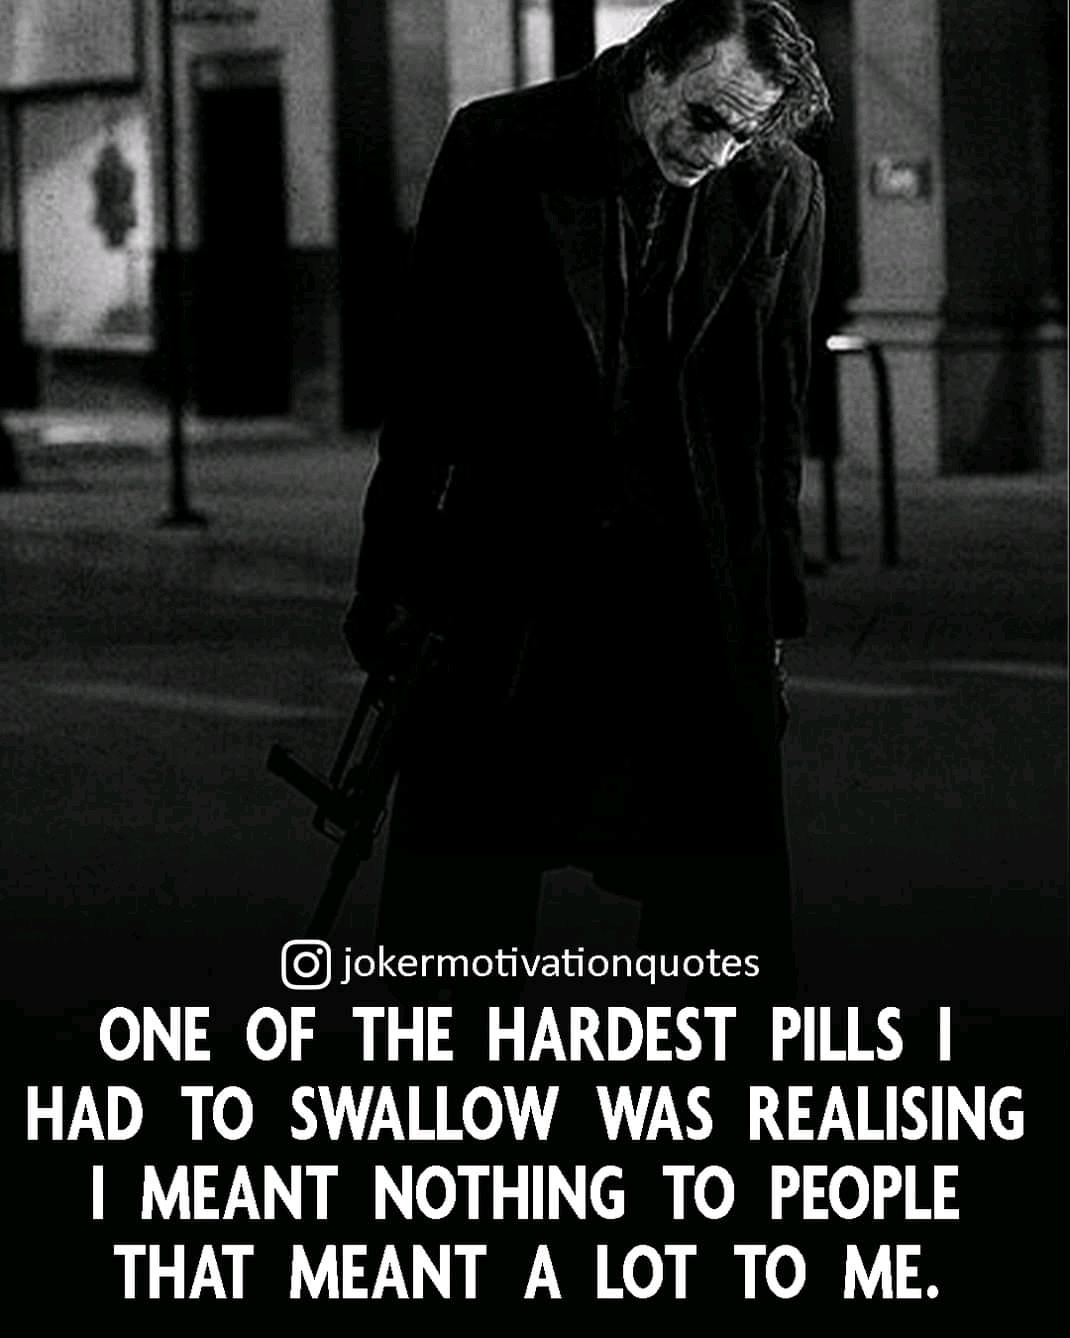 One of the hardest pills I had to swallow was realizing I meant nothing to people that meant a lot to me.